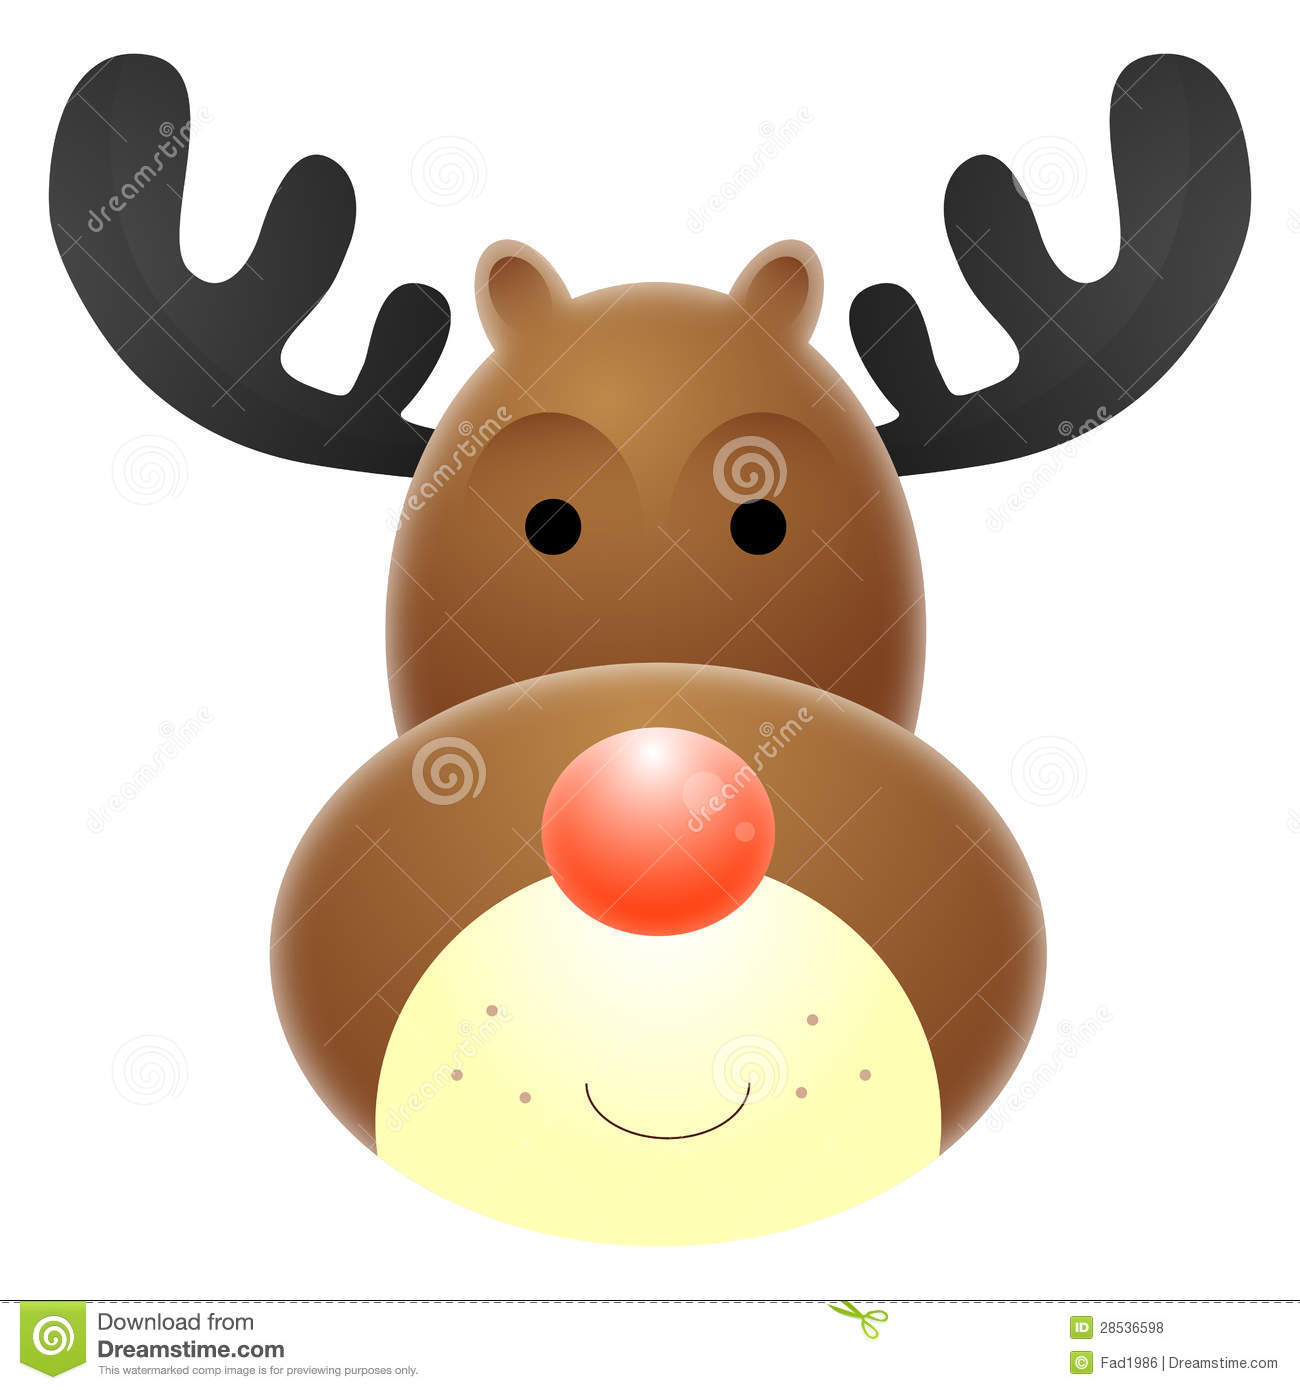 Rudolph The Red-nosed Reindeer #22